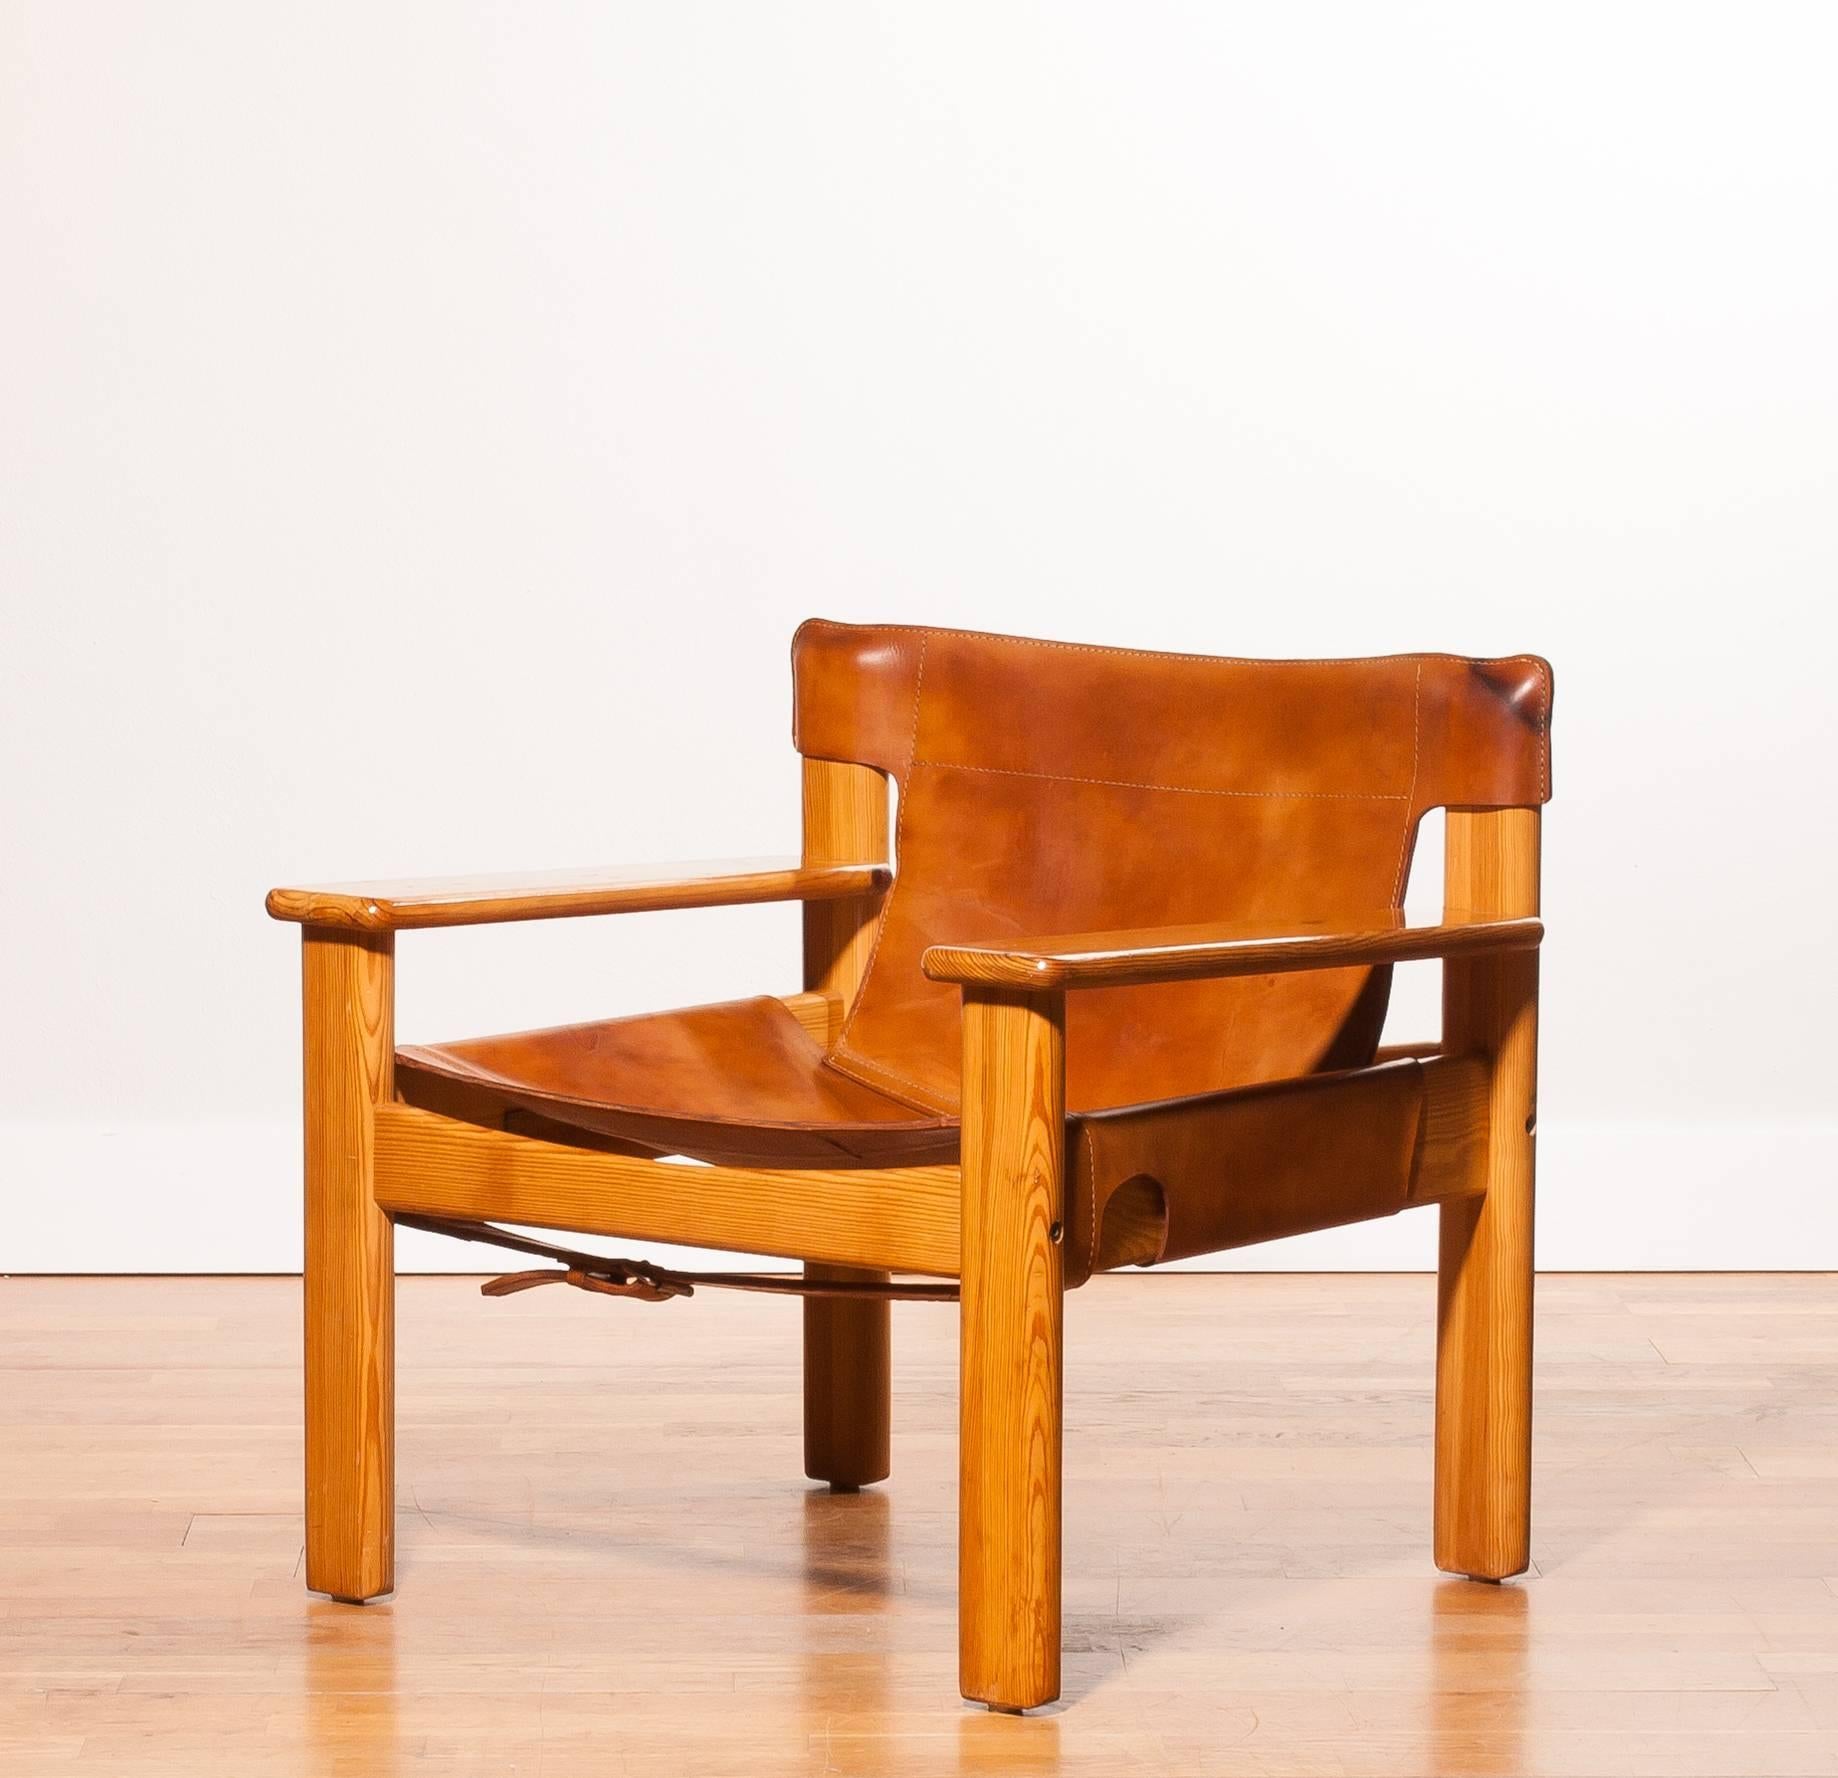 This beautiful chair is designed by Karin Mobring  Sweden.
The chair has a frame made of pine and the seating is made of very thick and sturdy cognac leather.
It is in a very beautiful condition.
Period 1970s
Dimensions: H 69 cm, W 73 cm, D 65 cm,